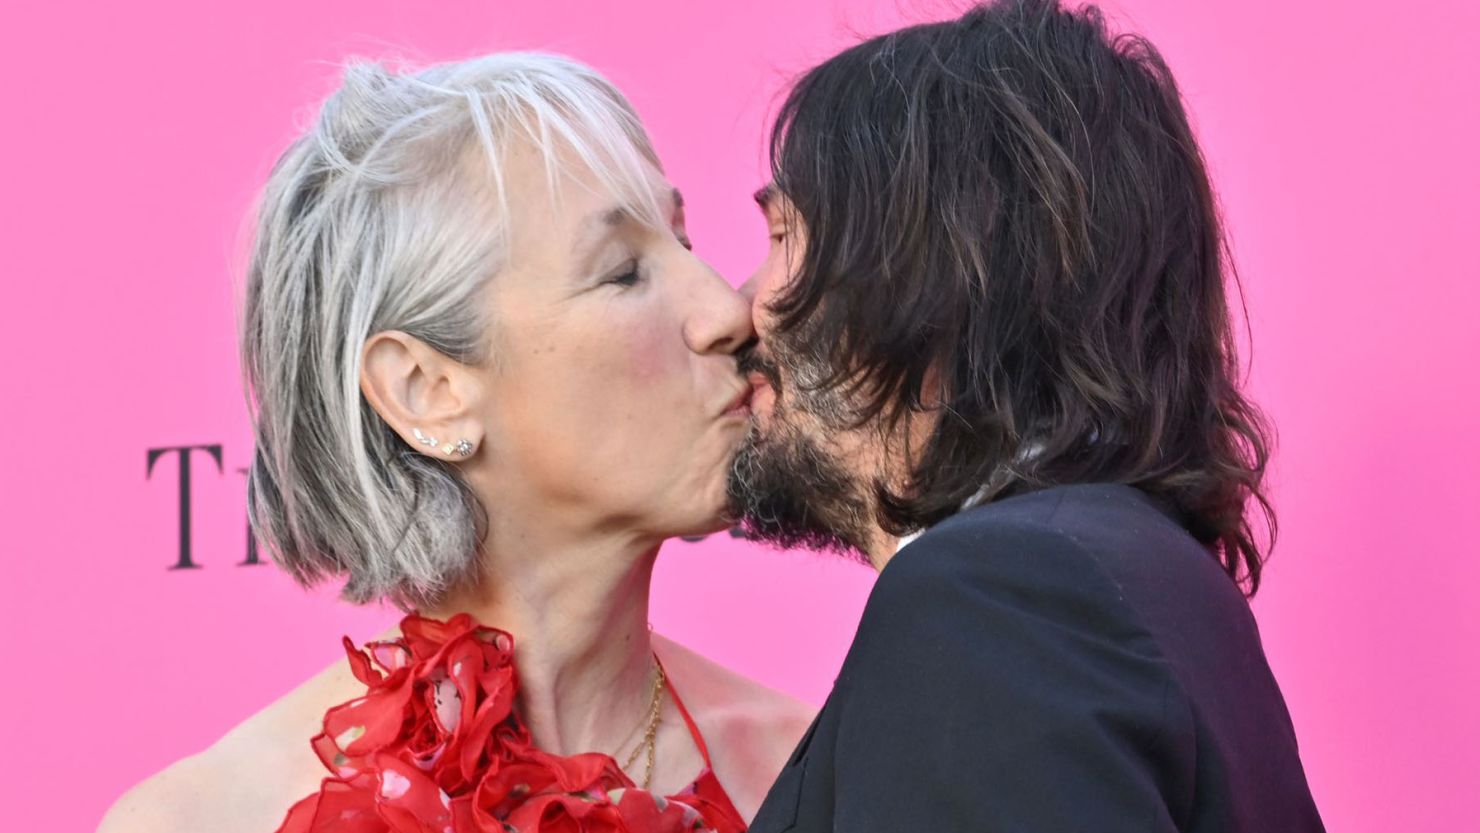 Alexandra Grant and Keanu Reeves, shown here at the Museum of Contemporary Art Gala in Los Angeles on April 15, 2023, went public with their relationship in 2018.